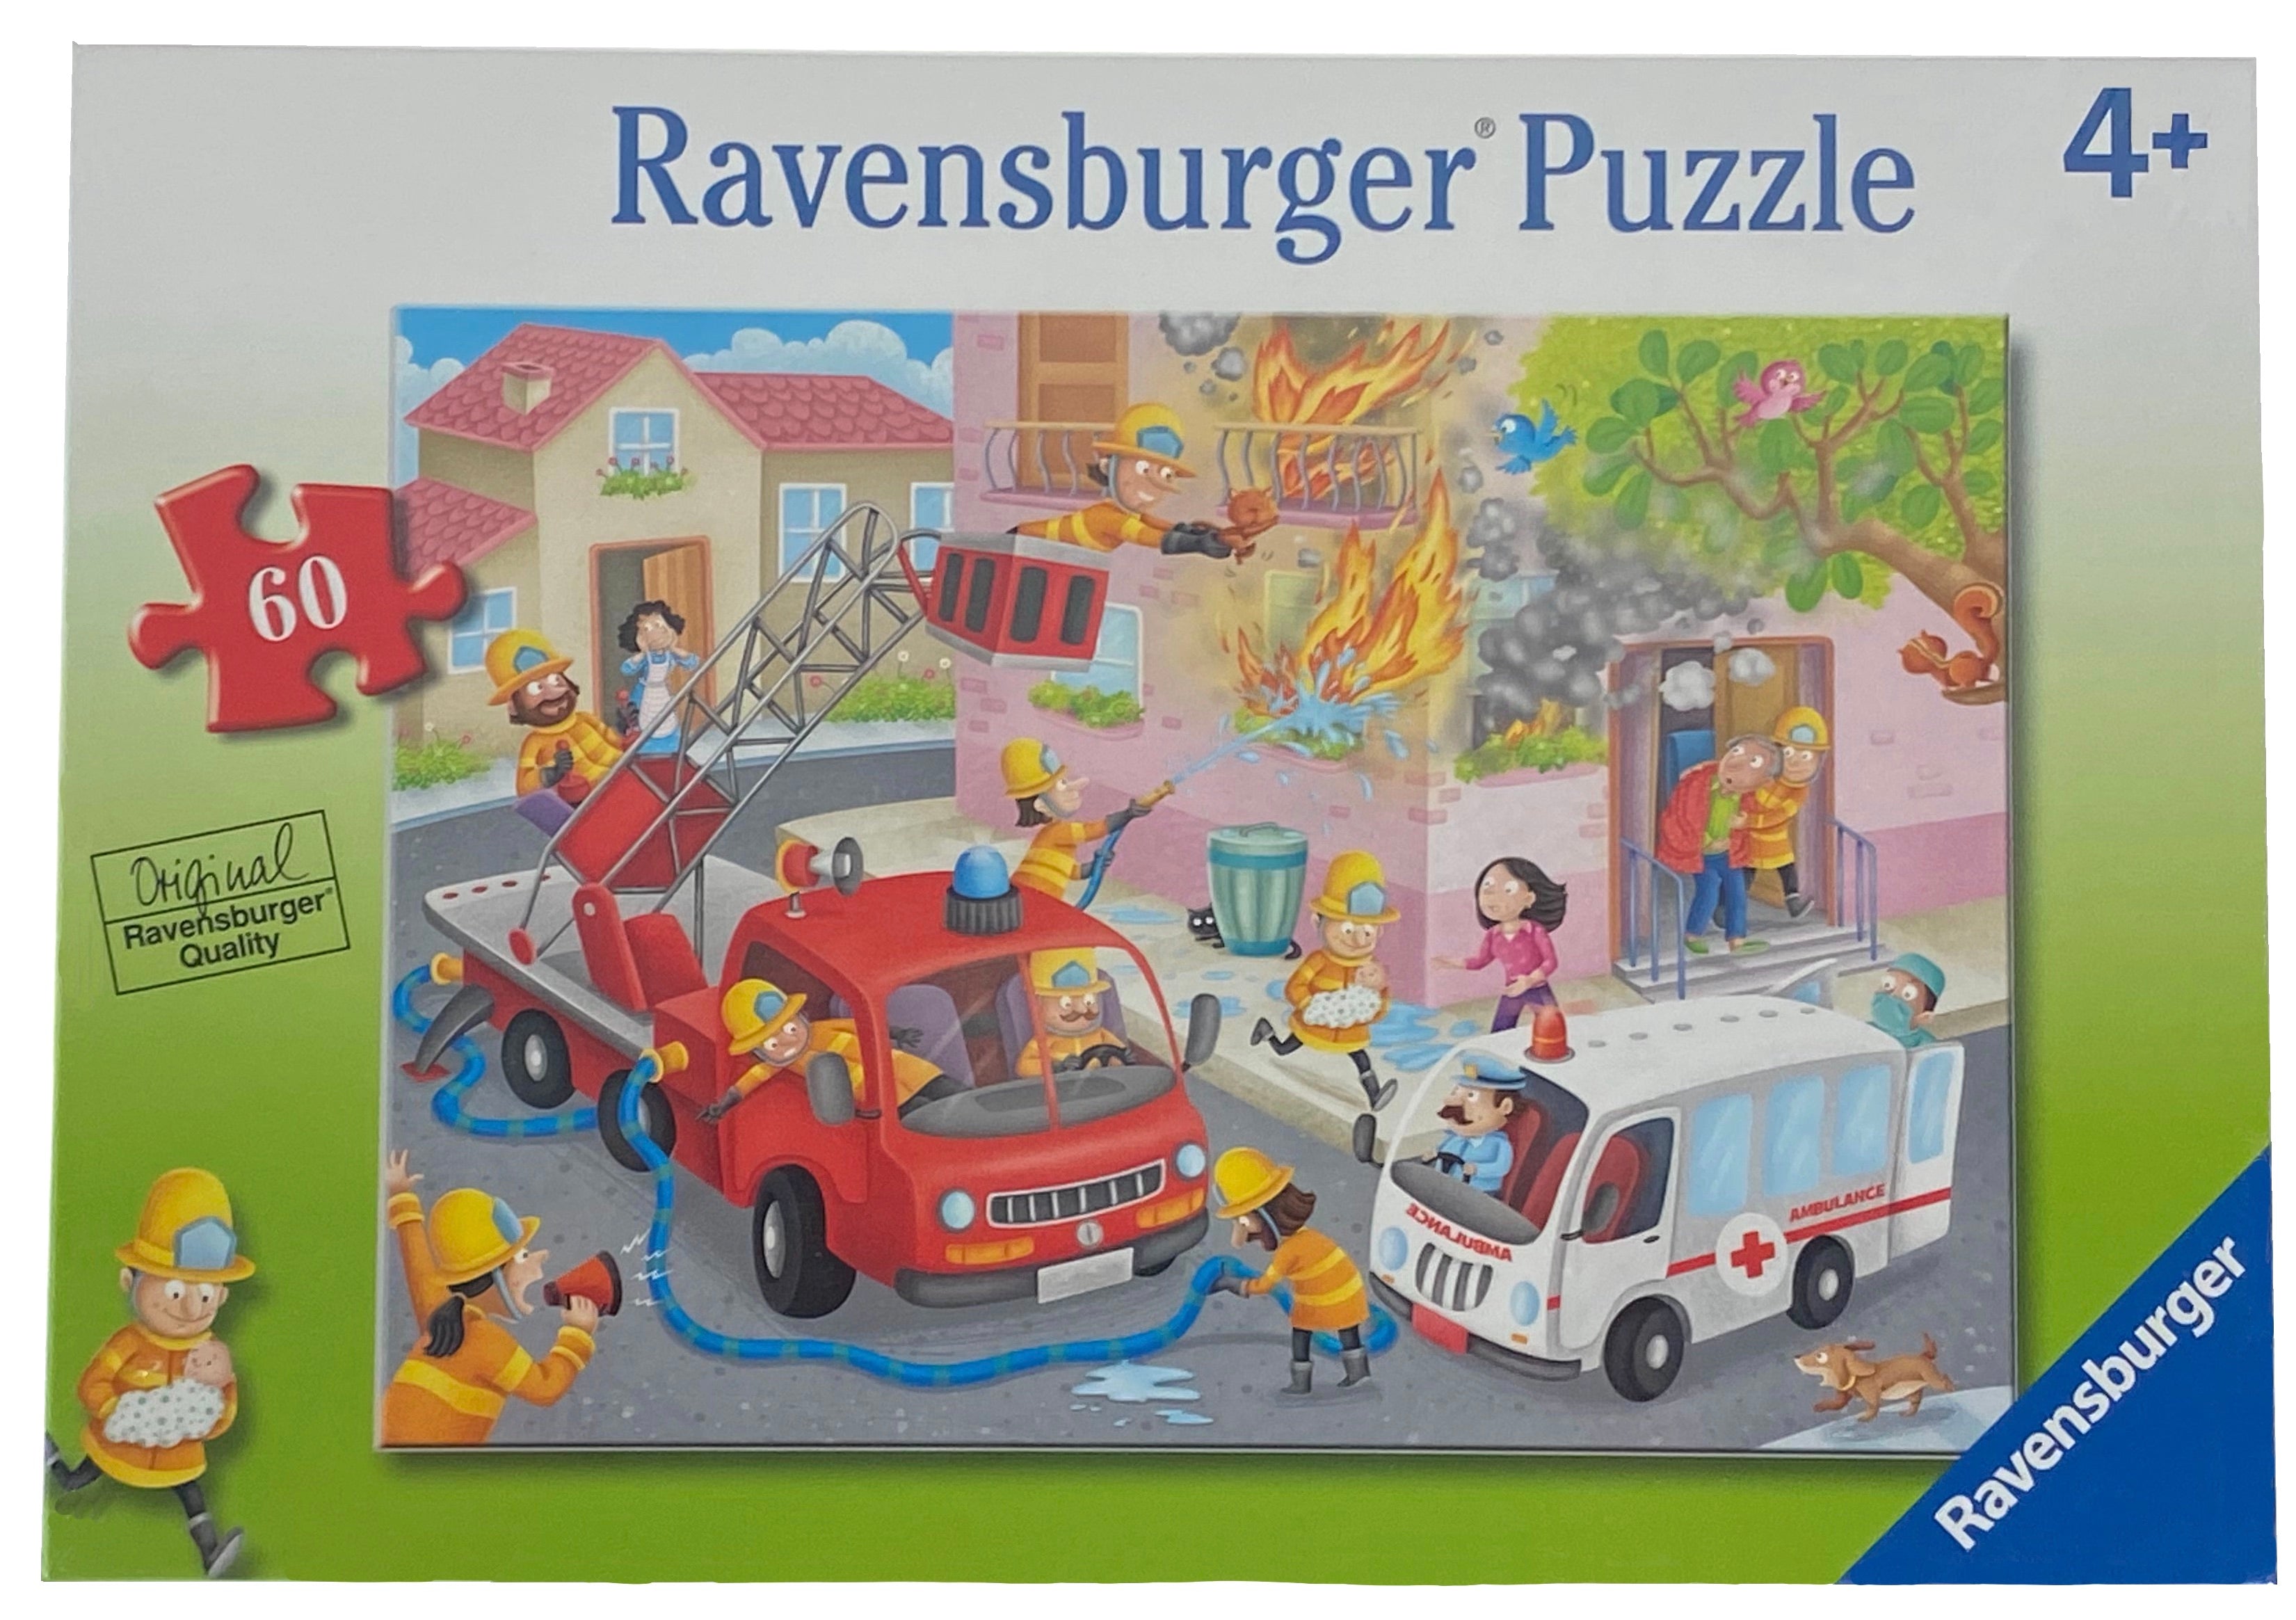 Firefighter Rescue 60 Piece Puzzle    